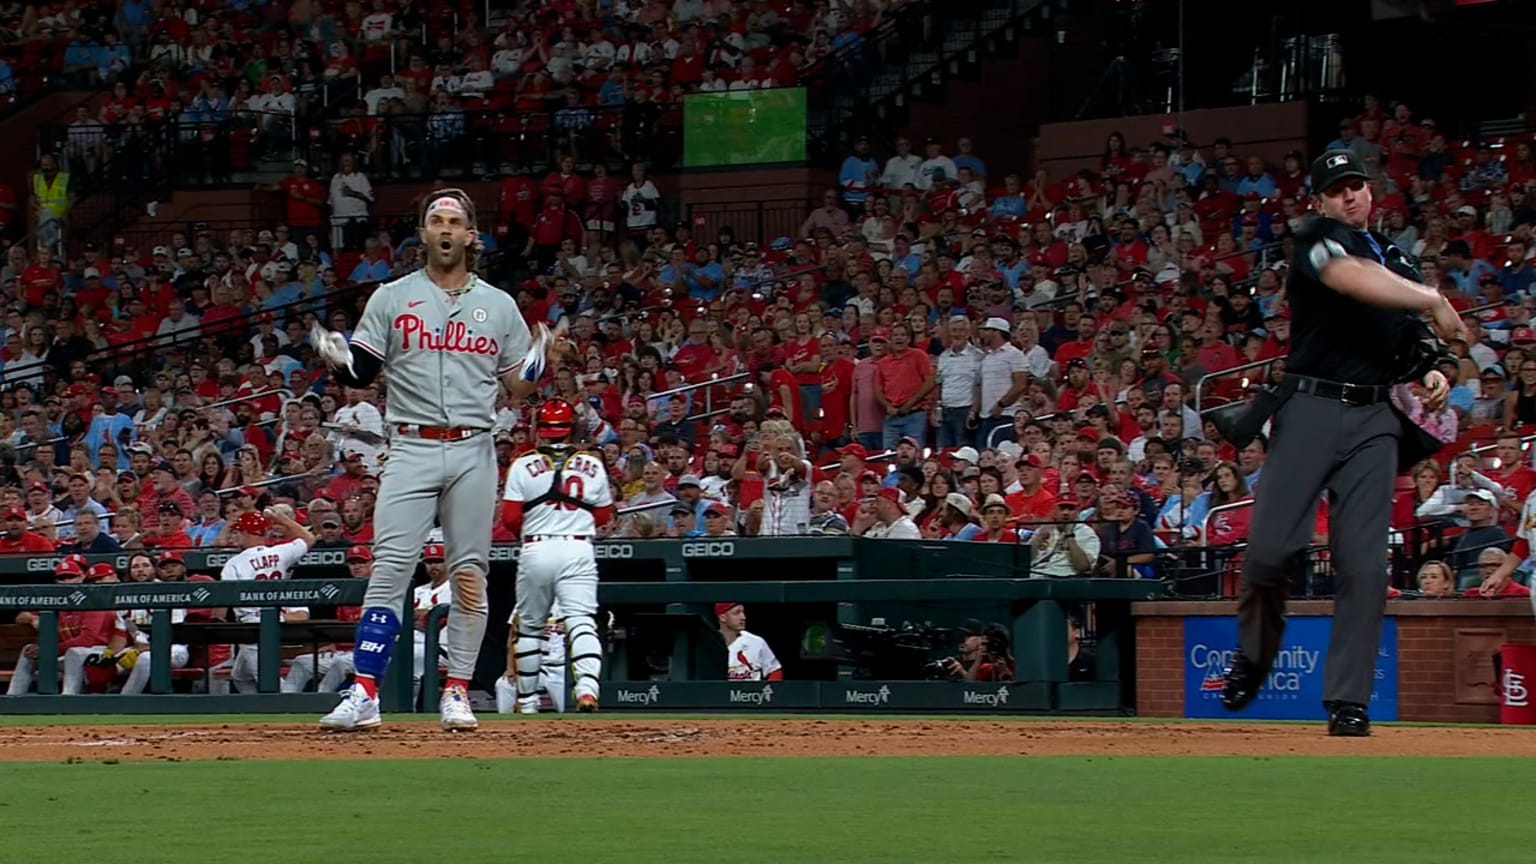 WATCH: Phillies' Bryce Harper pulls off trick play against Nationals 